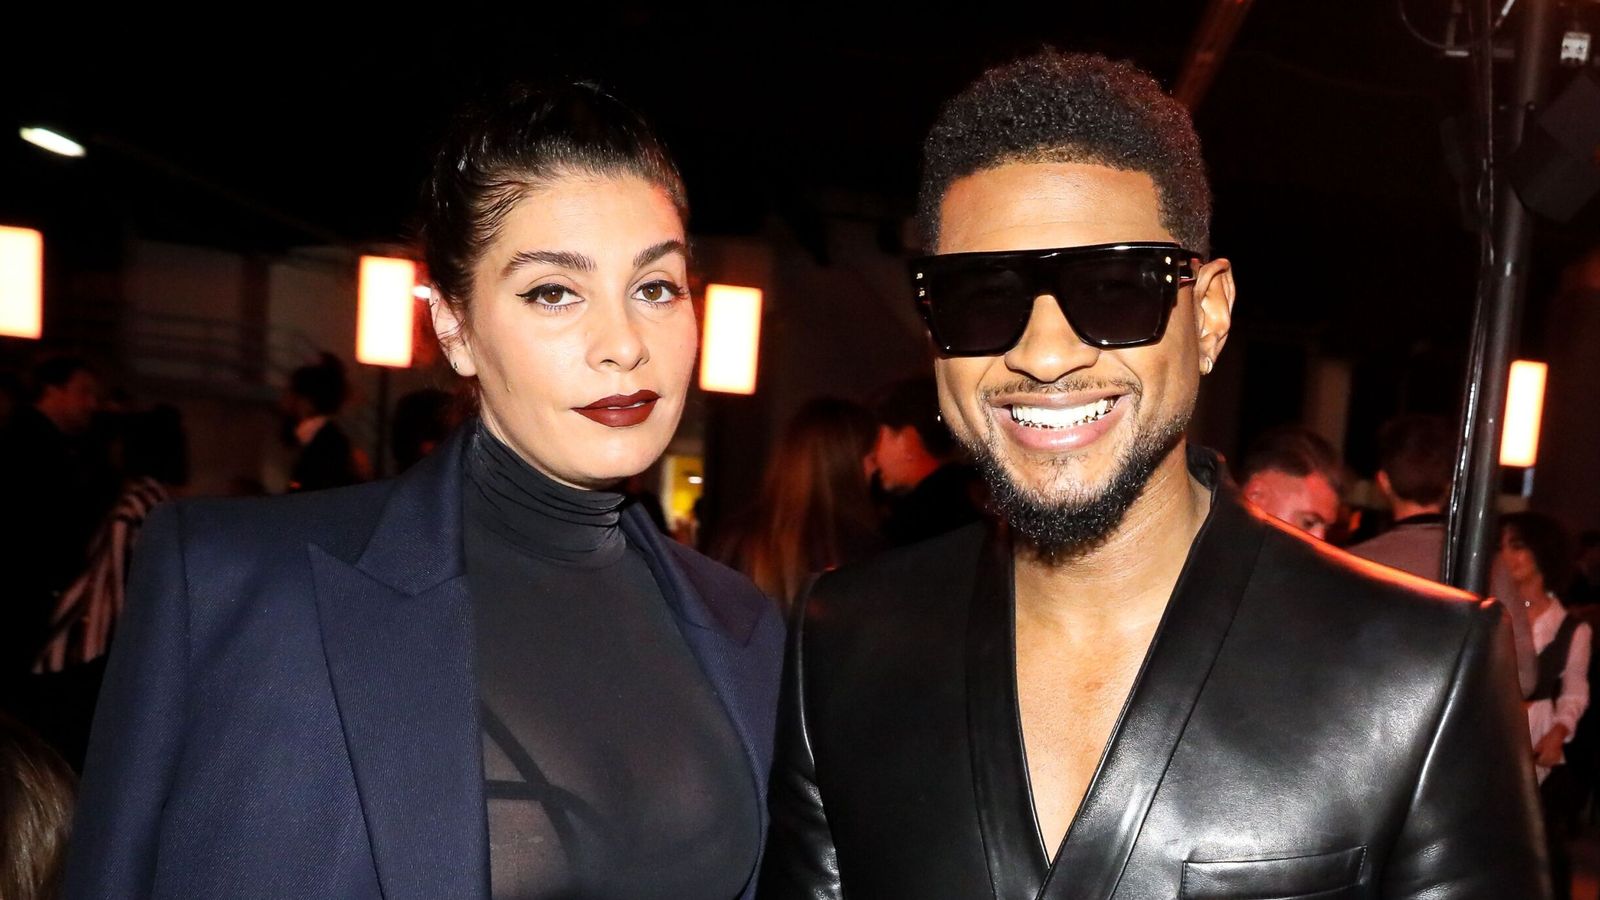 Usher says 'I do' in Las Vegas ceremony hours after Super Bowl performance